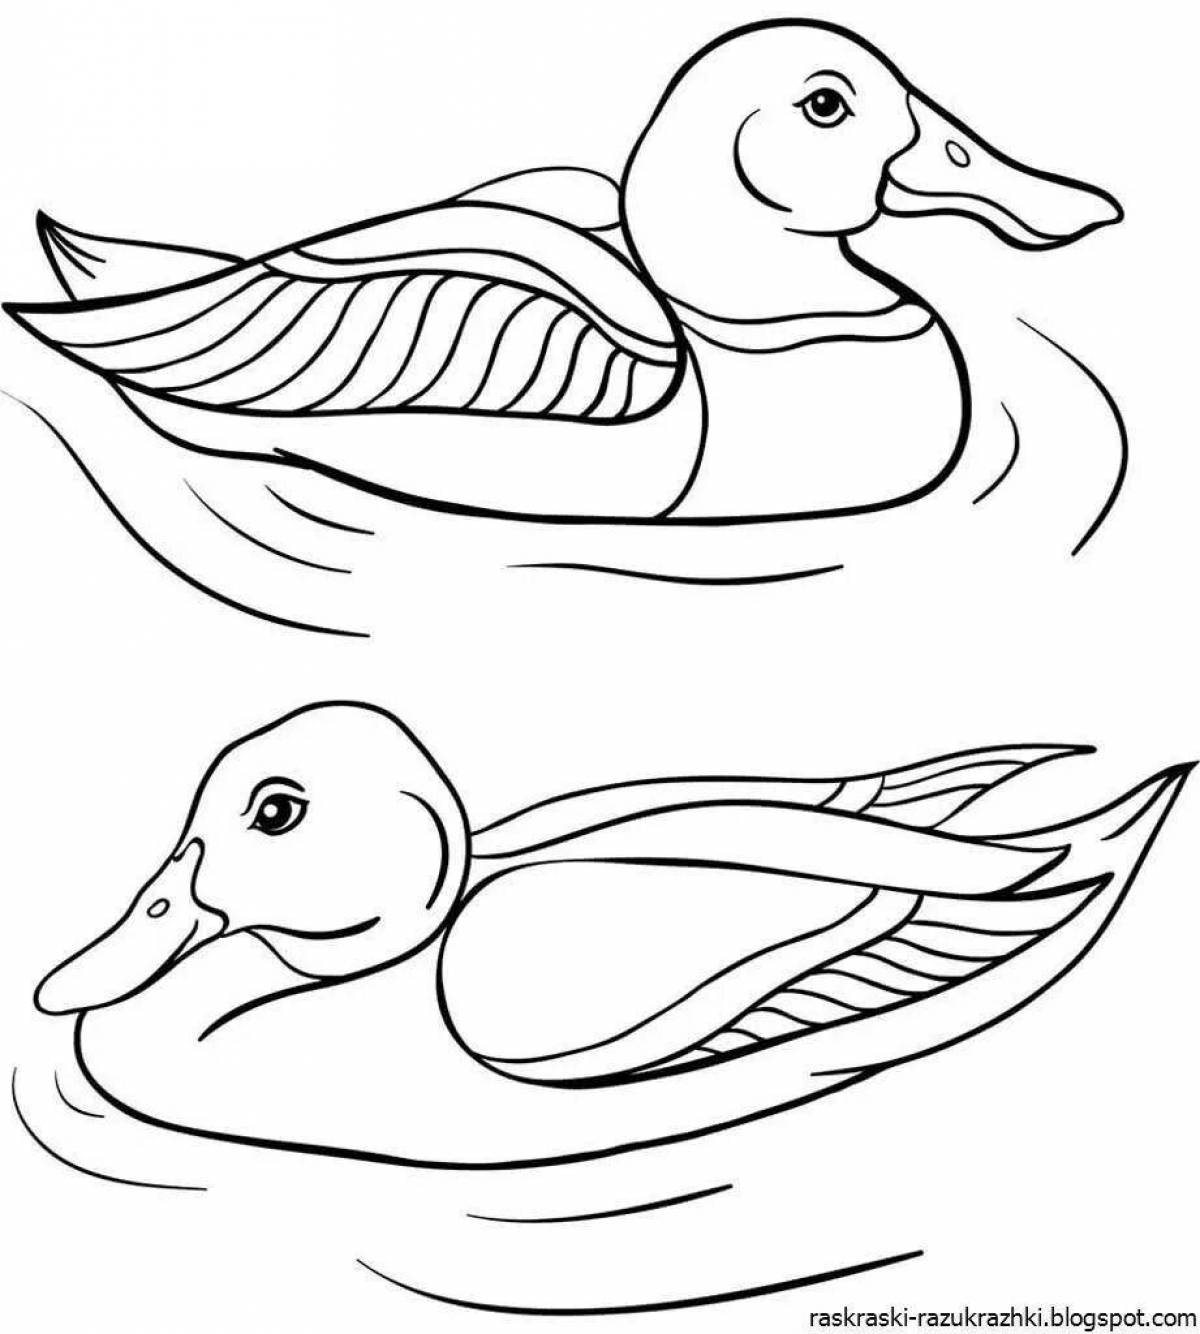 Duck picture for kids #5